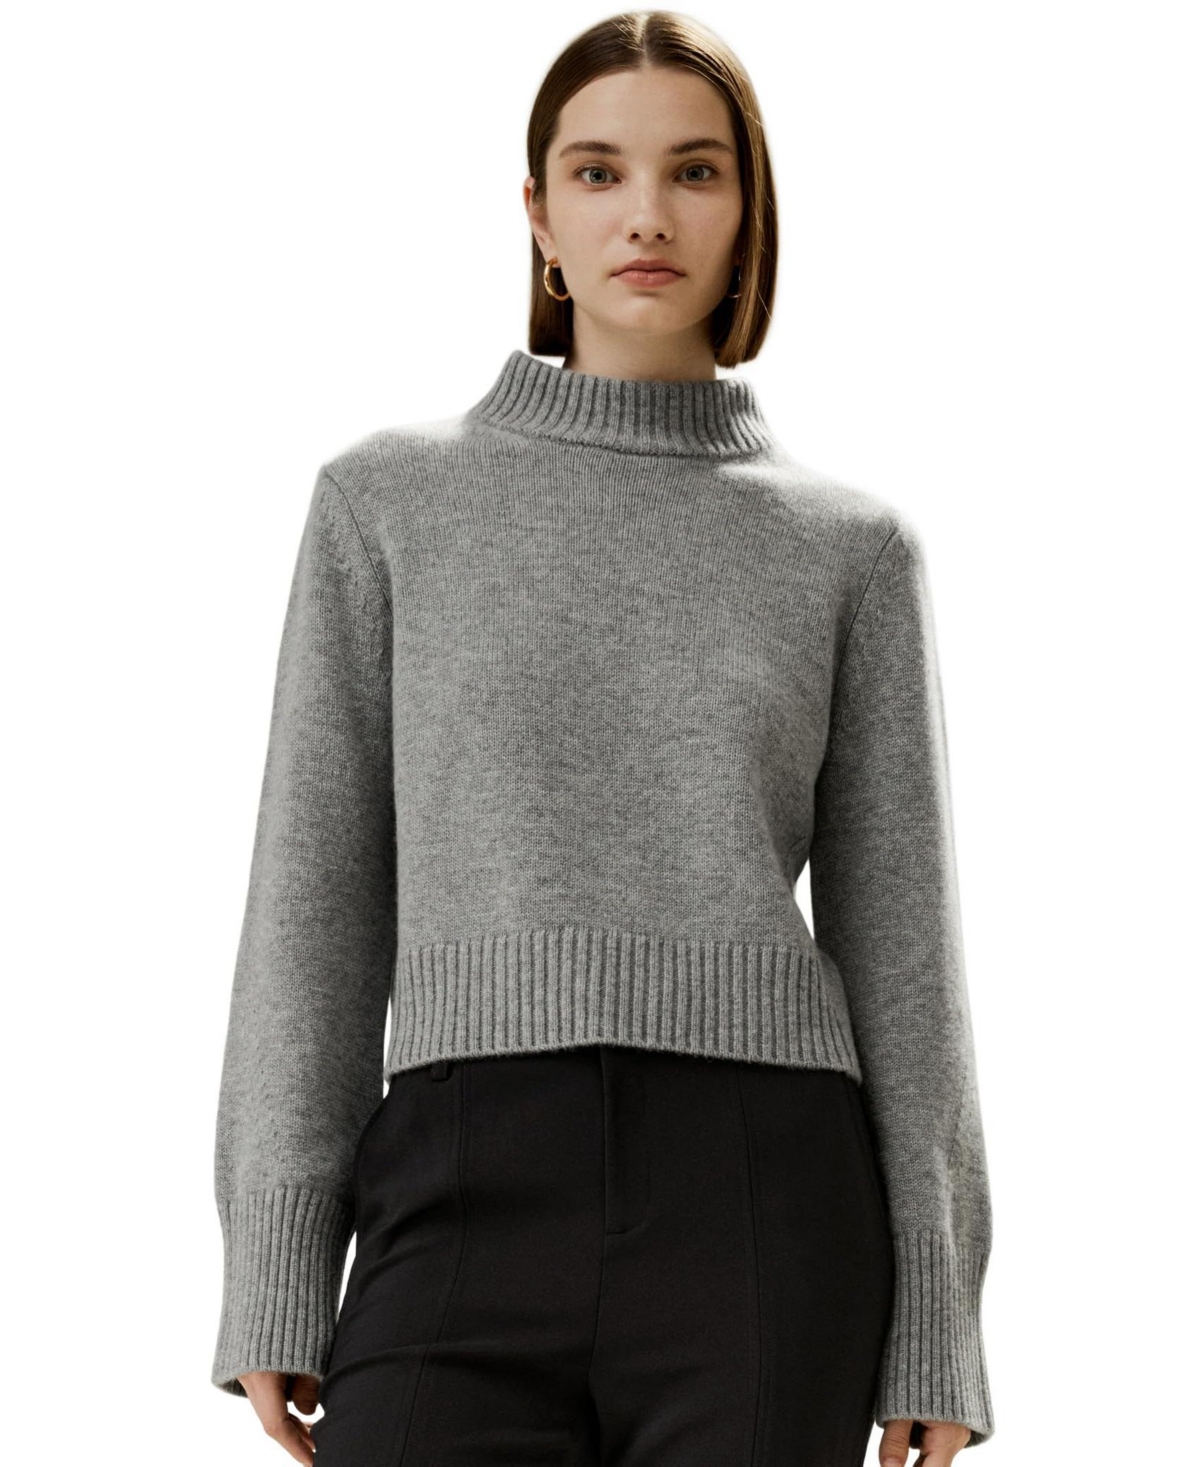 Women's Ribbed Collar and Hemline Wool Cashmere Sweater for Women - Black